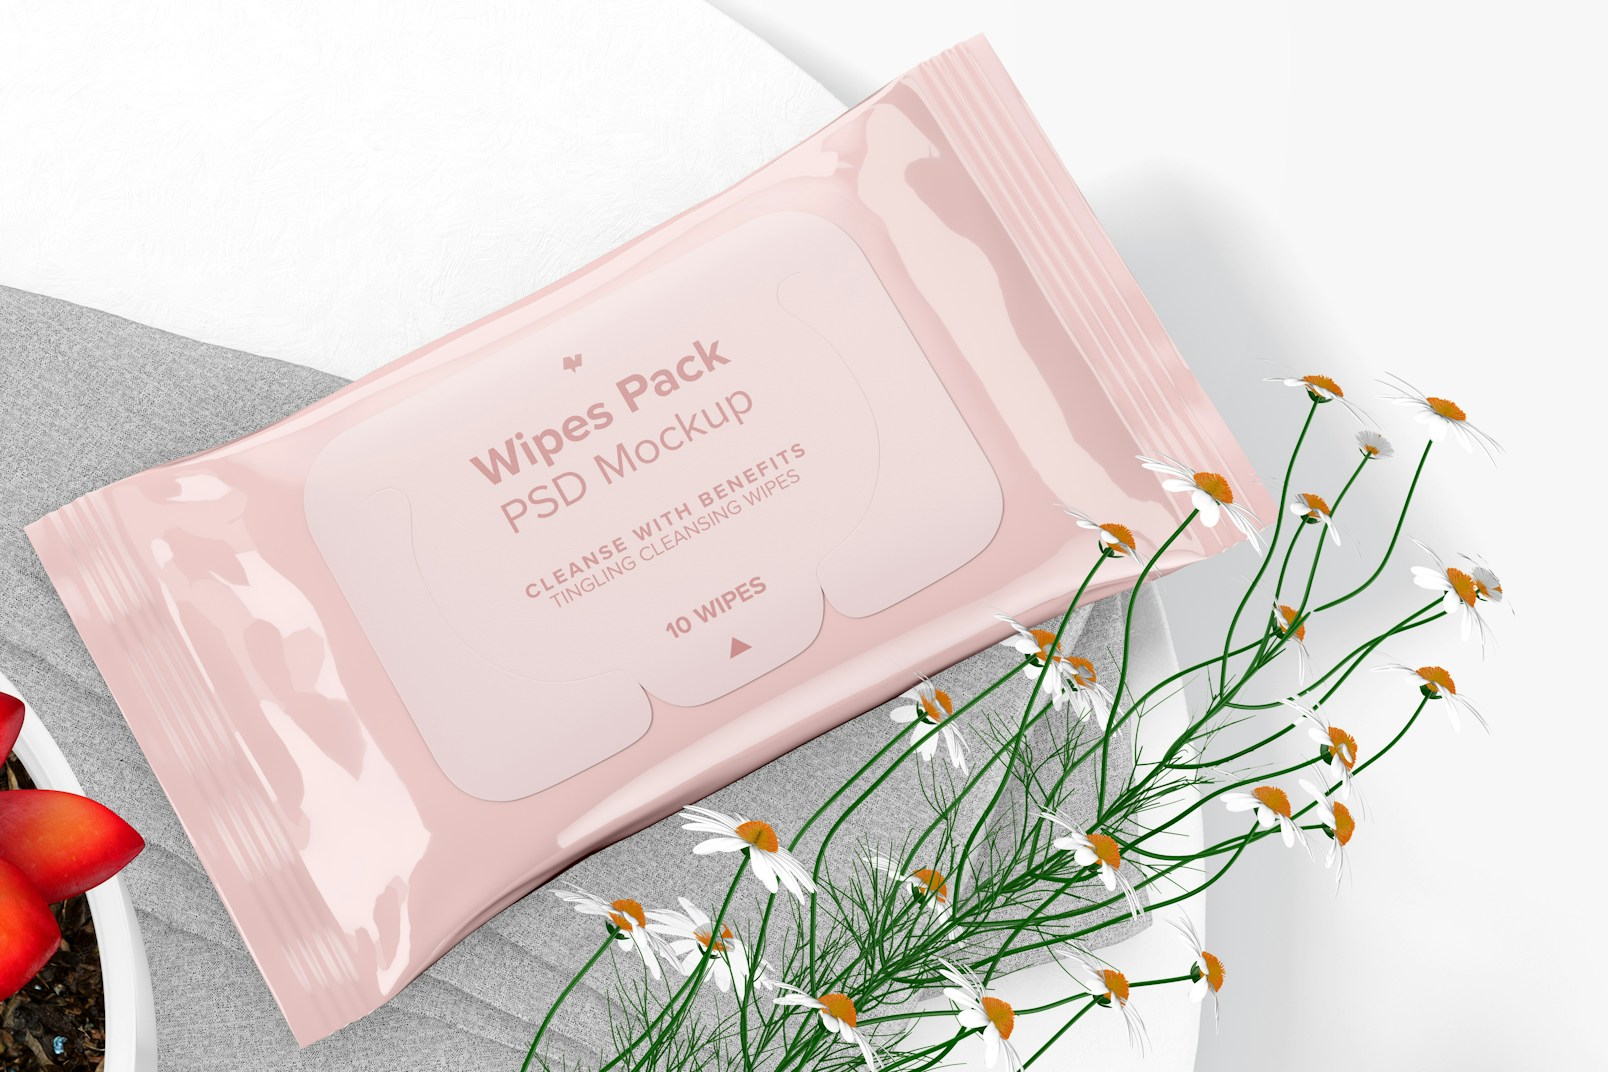 Wipes Pack Mockup, Perspective